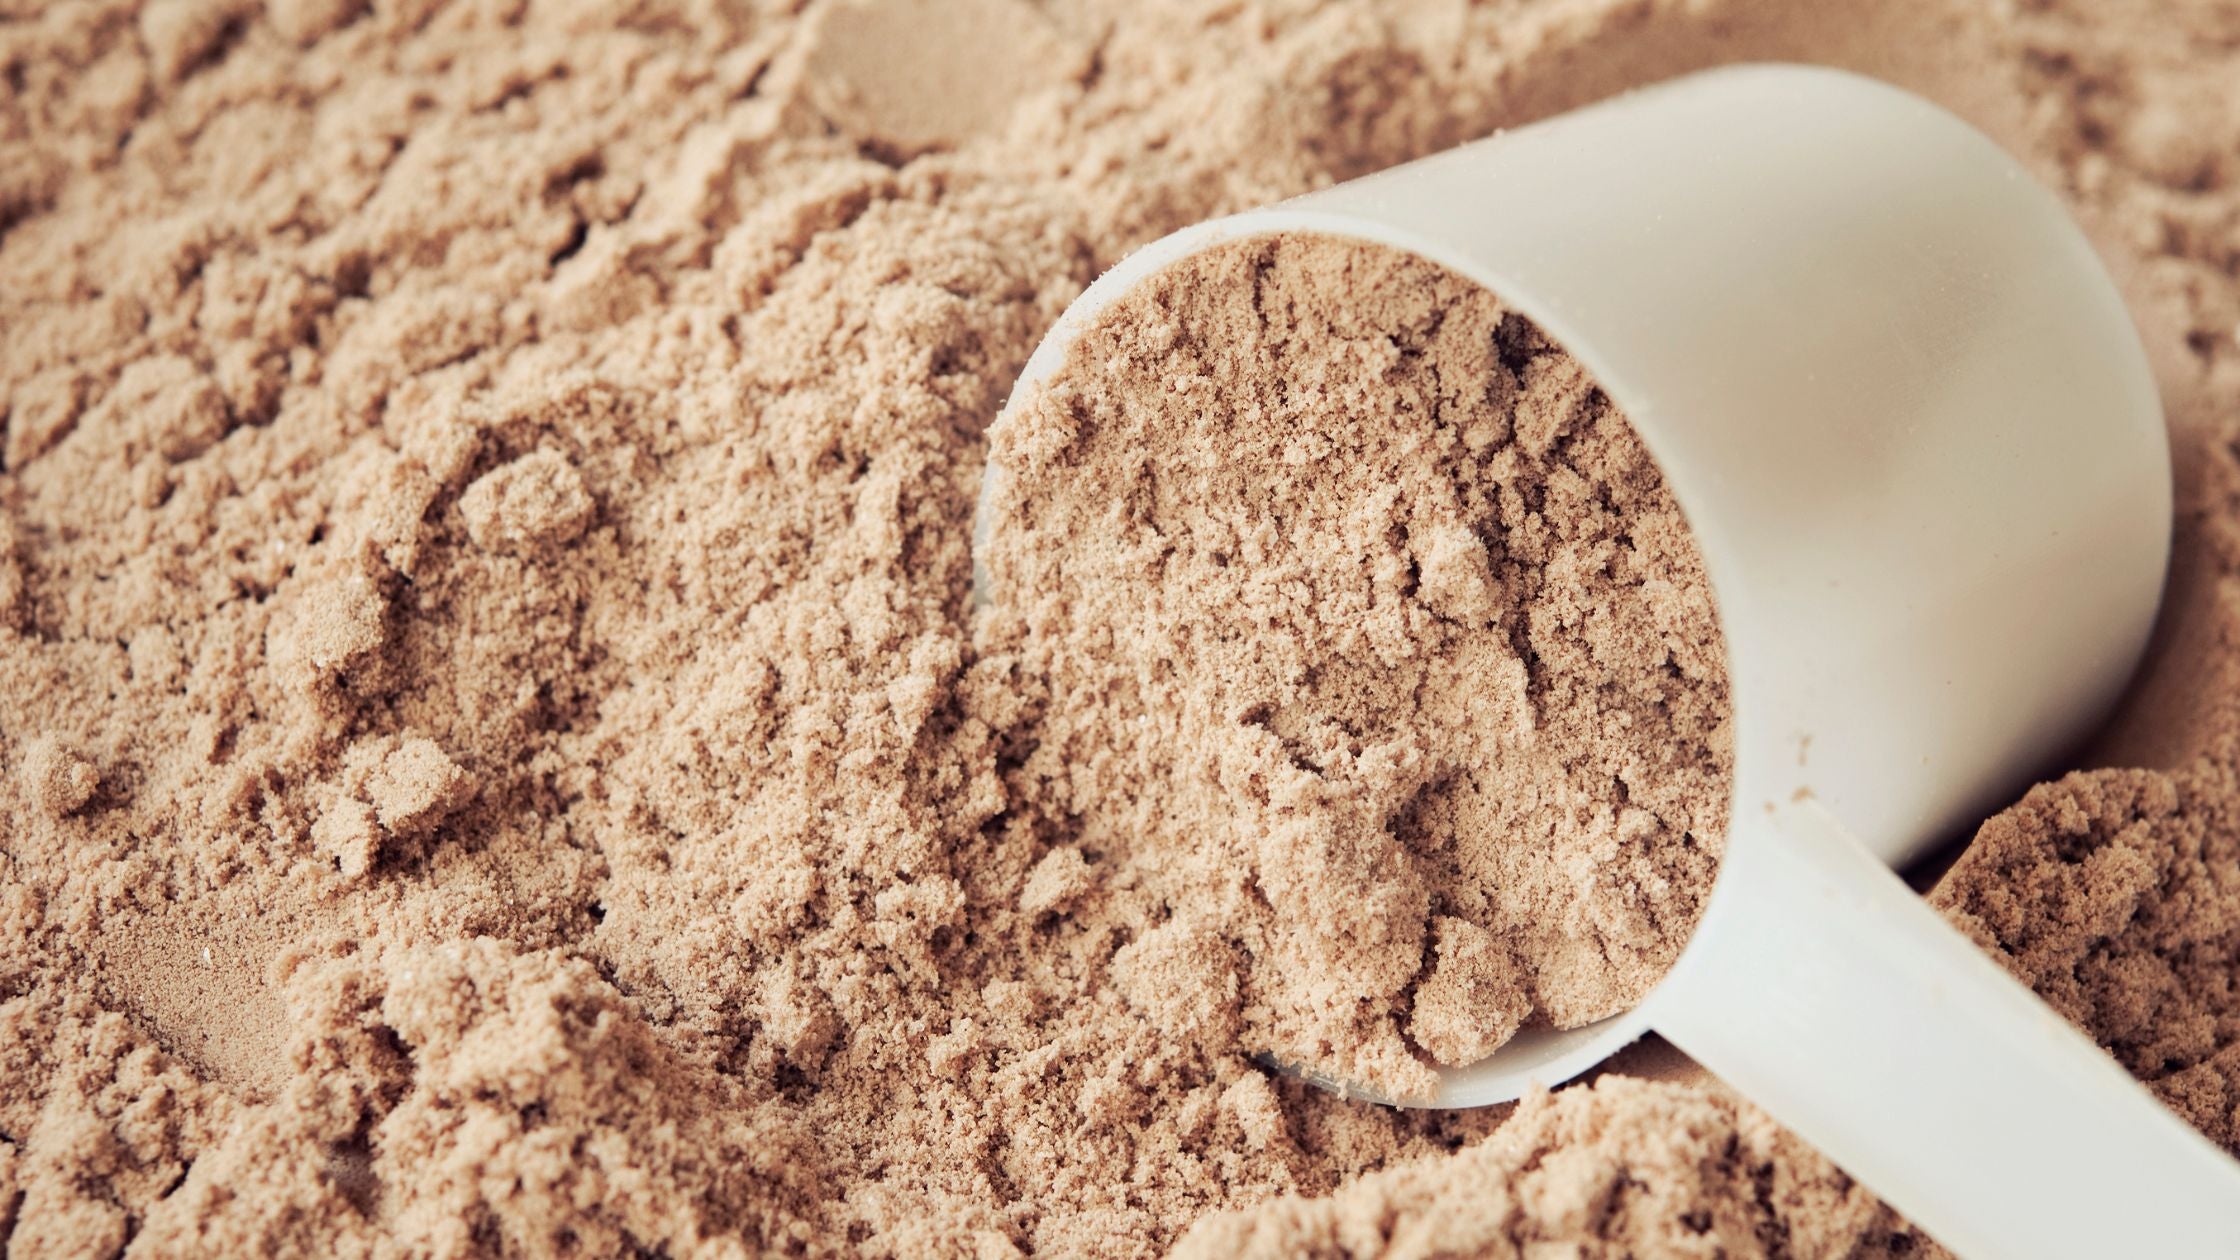 Are all plant-based protein powders "complete"?